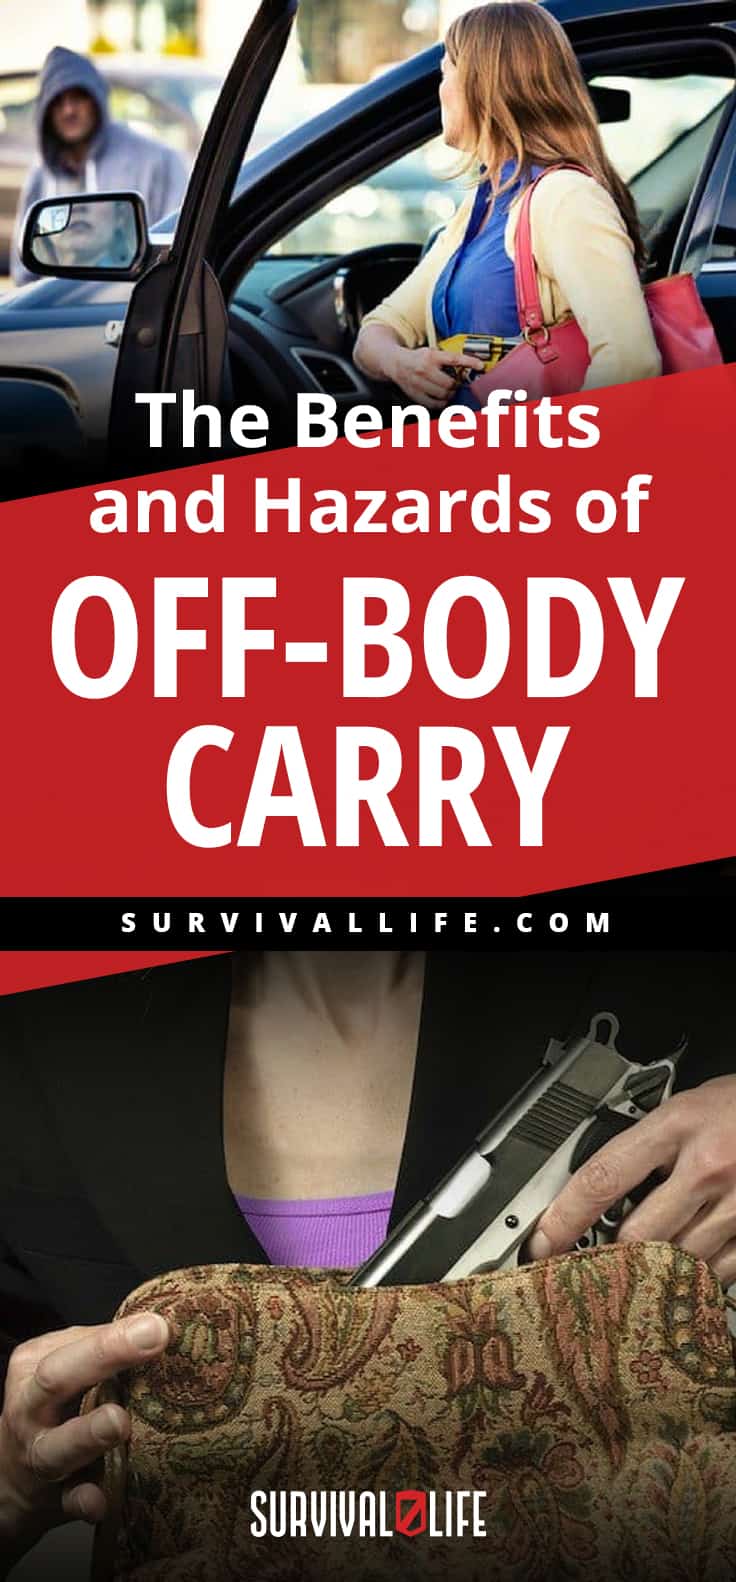 Off-Body Carry | The Benefits and Hazards of Off-Body Carry